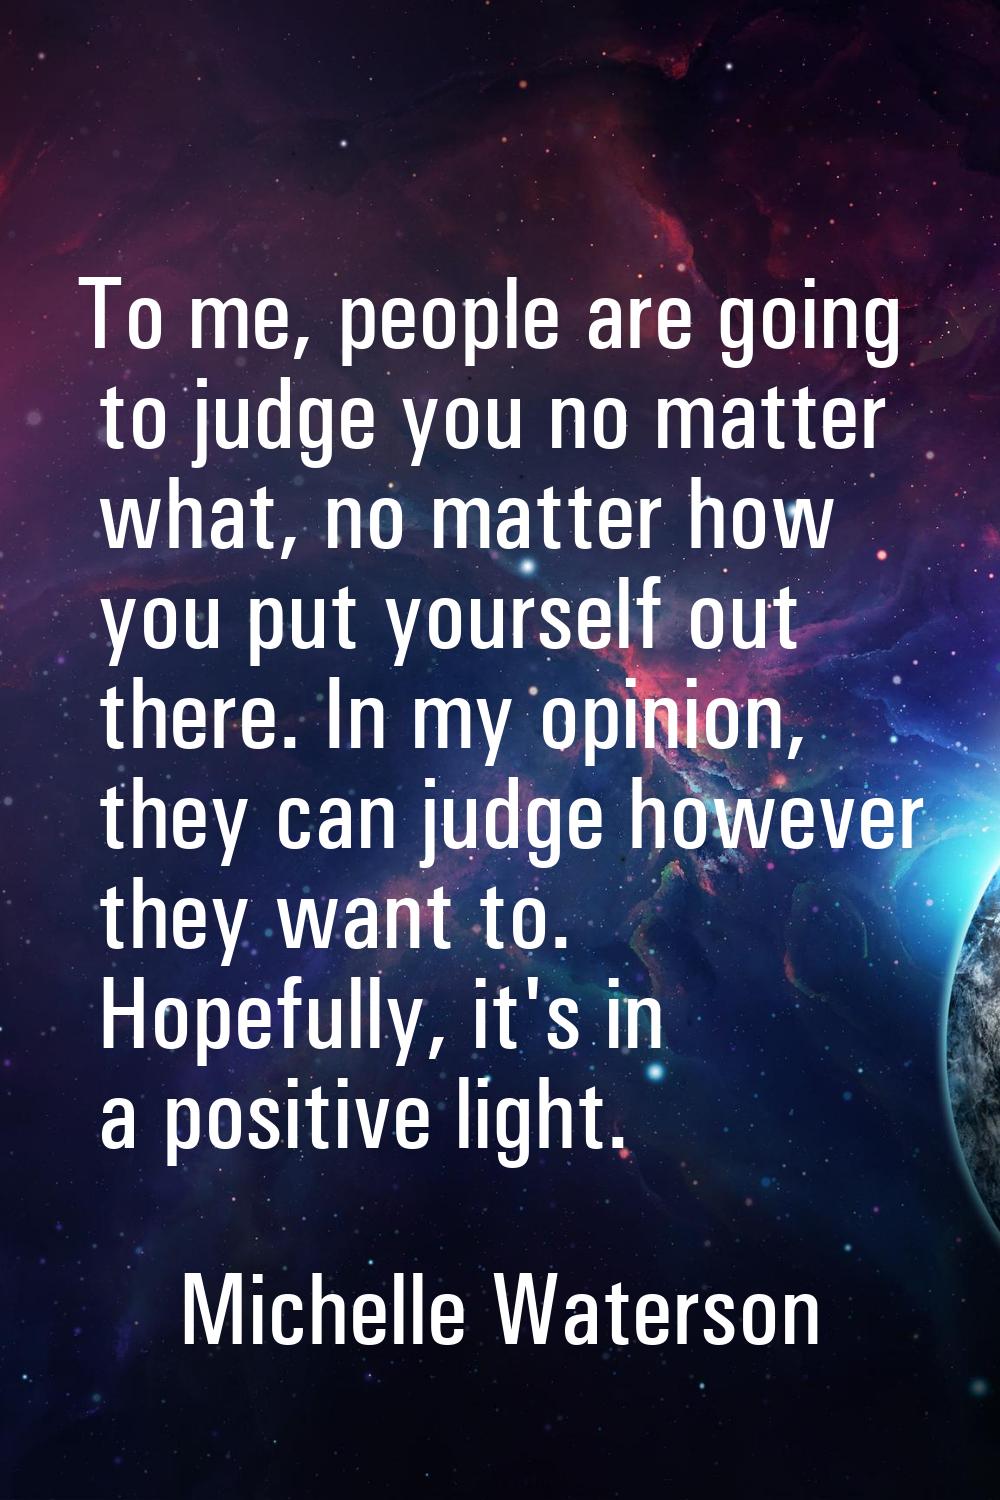 To me, people are going to judge you no matter what, no matter how you put yourself out there. In m